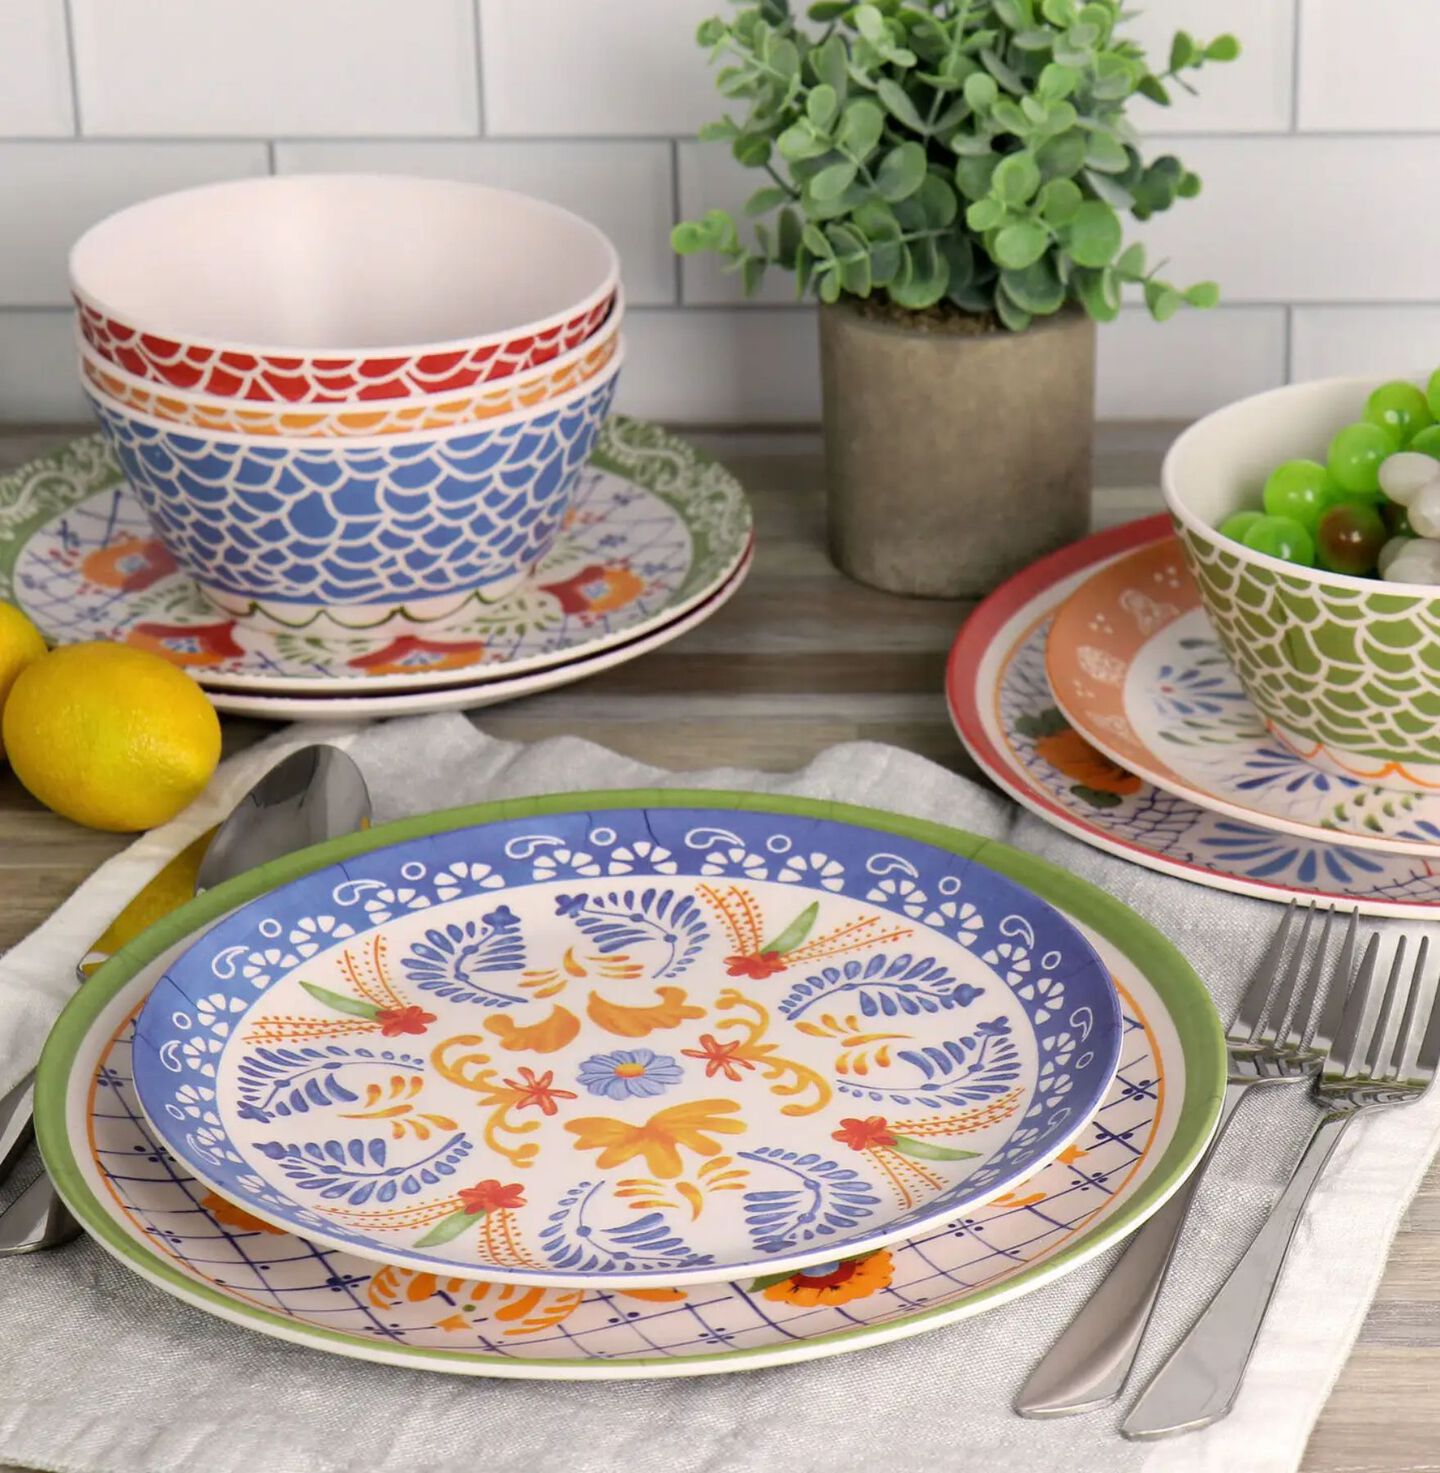 Place setting with colorful blue, green, yellow and red patterned plates and bowls